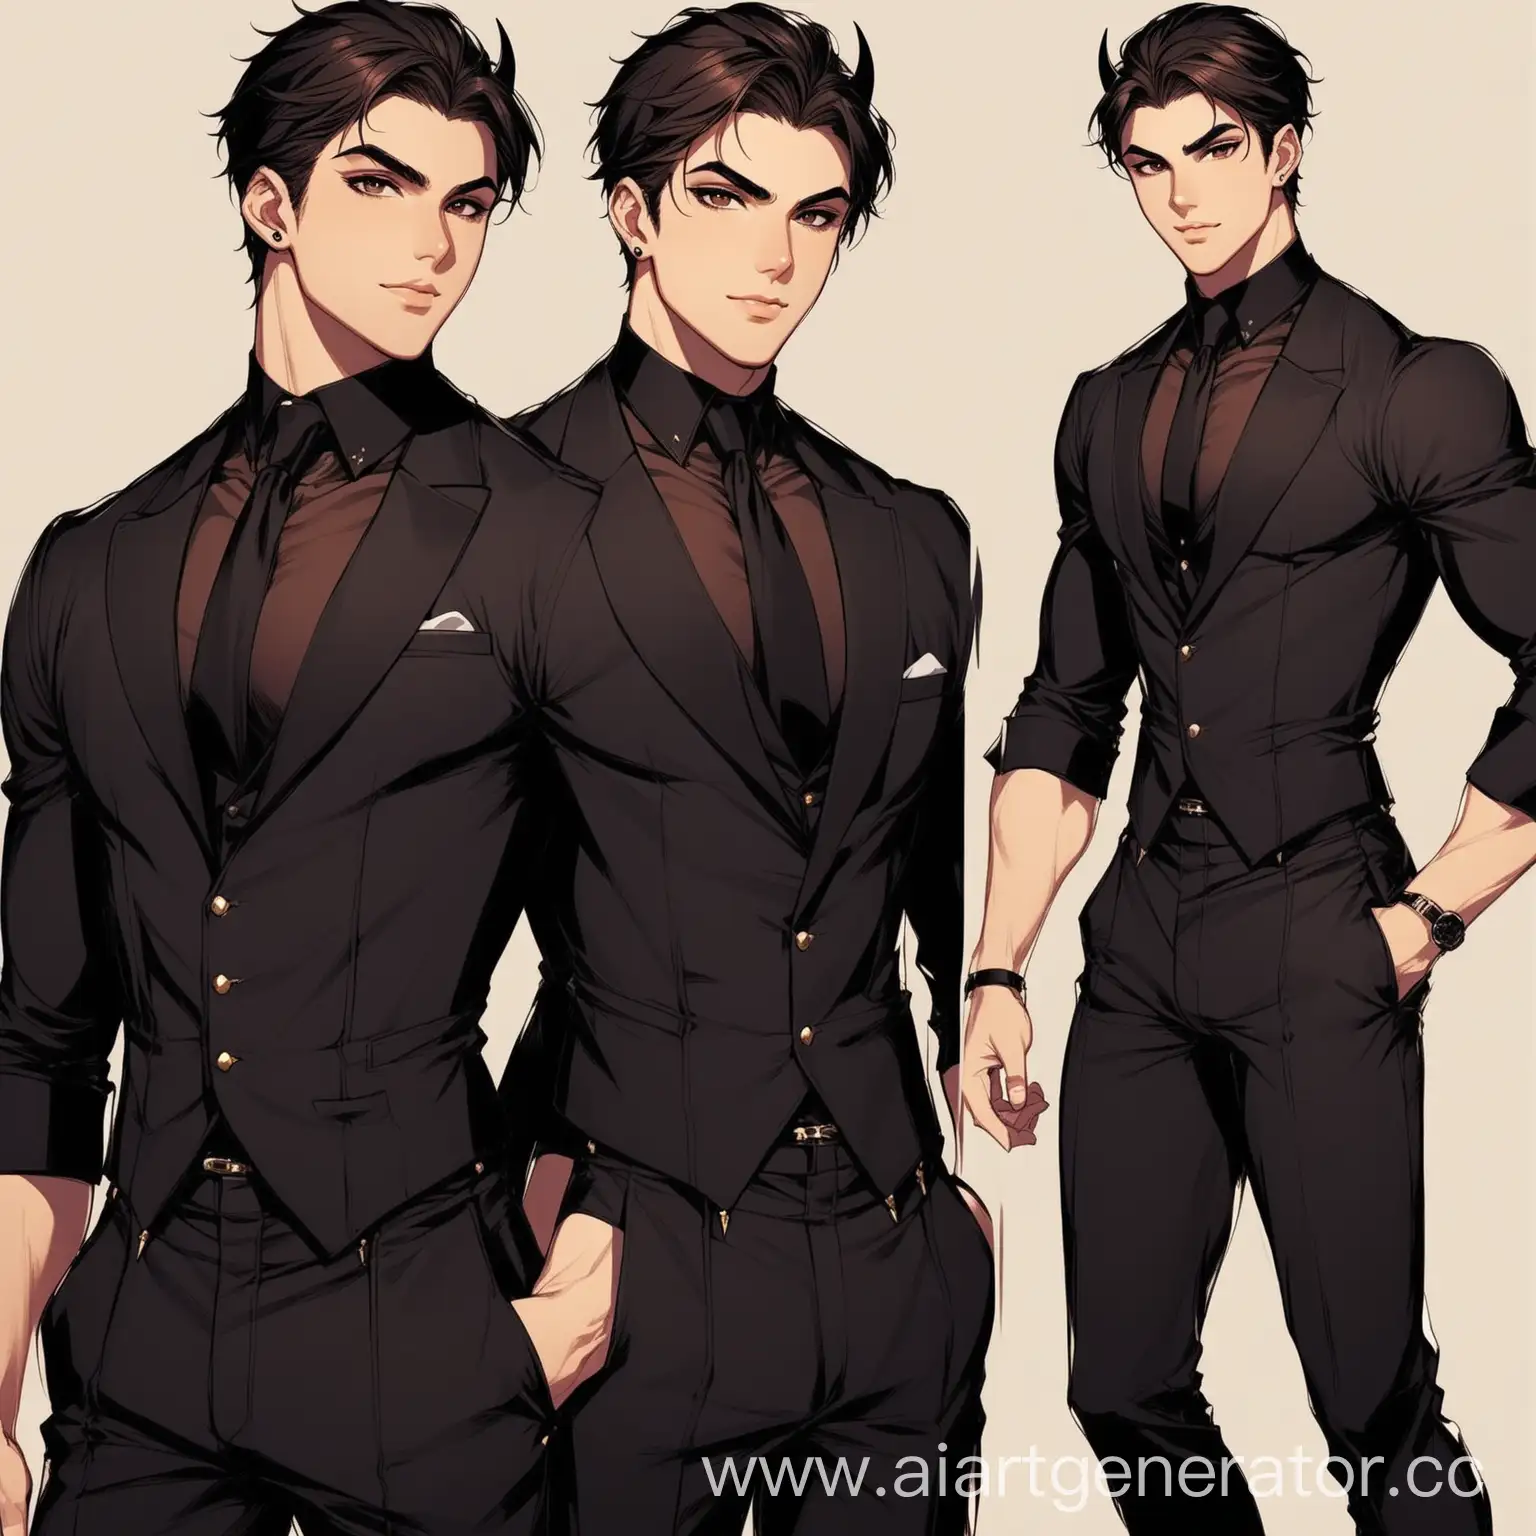 Young-Heartthrob-Demon-Brunet-with-Dark-Eyes-and-Classy-Style